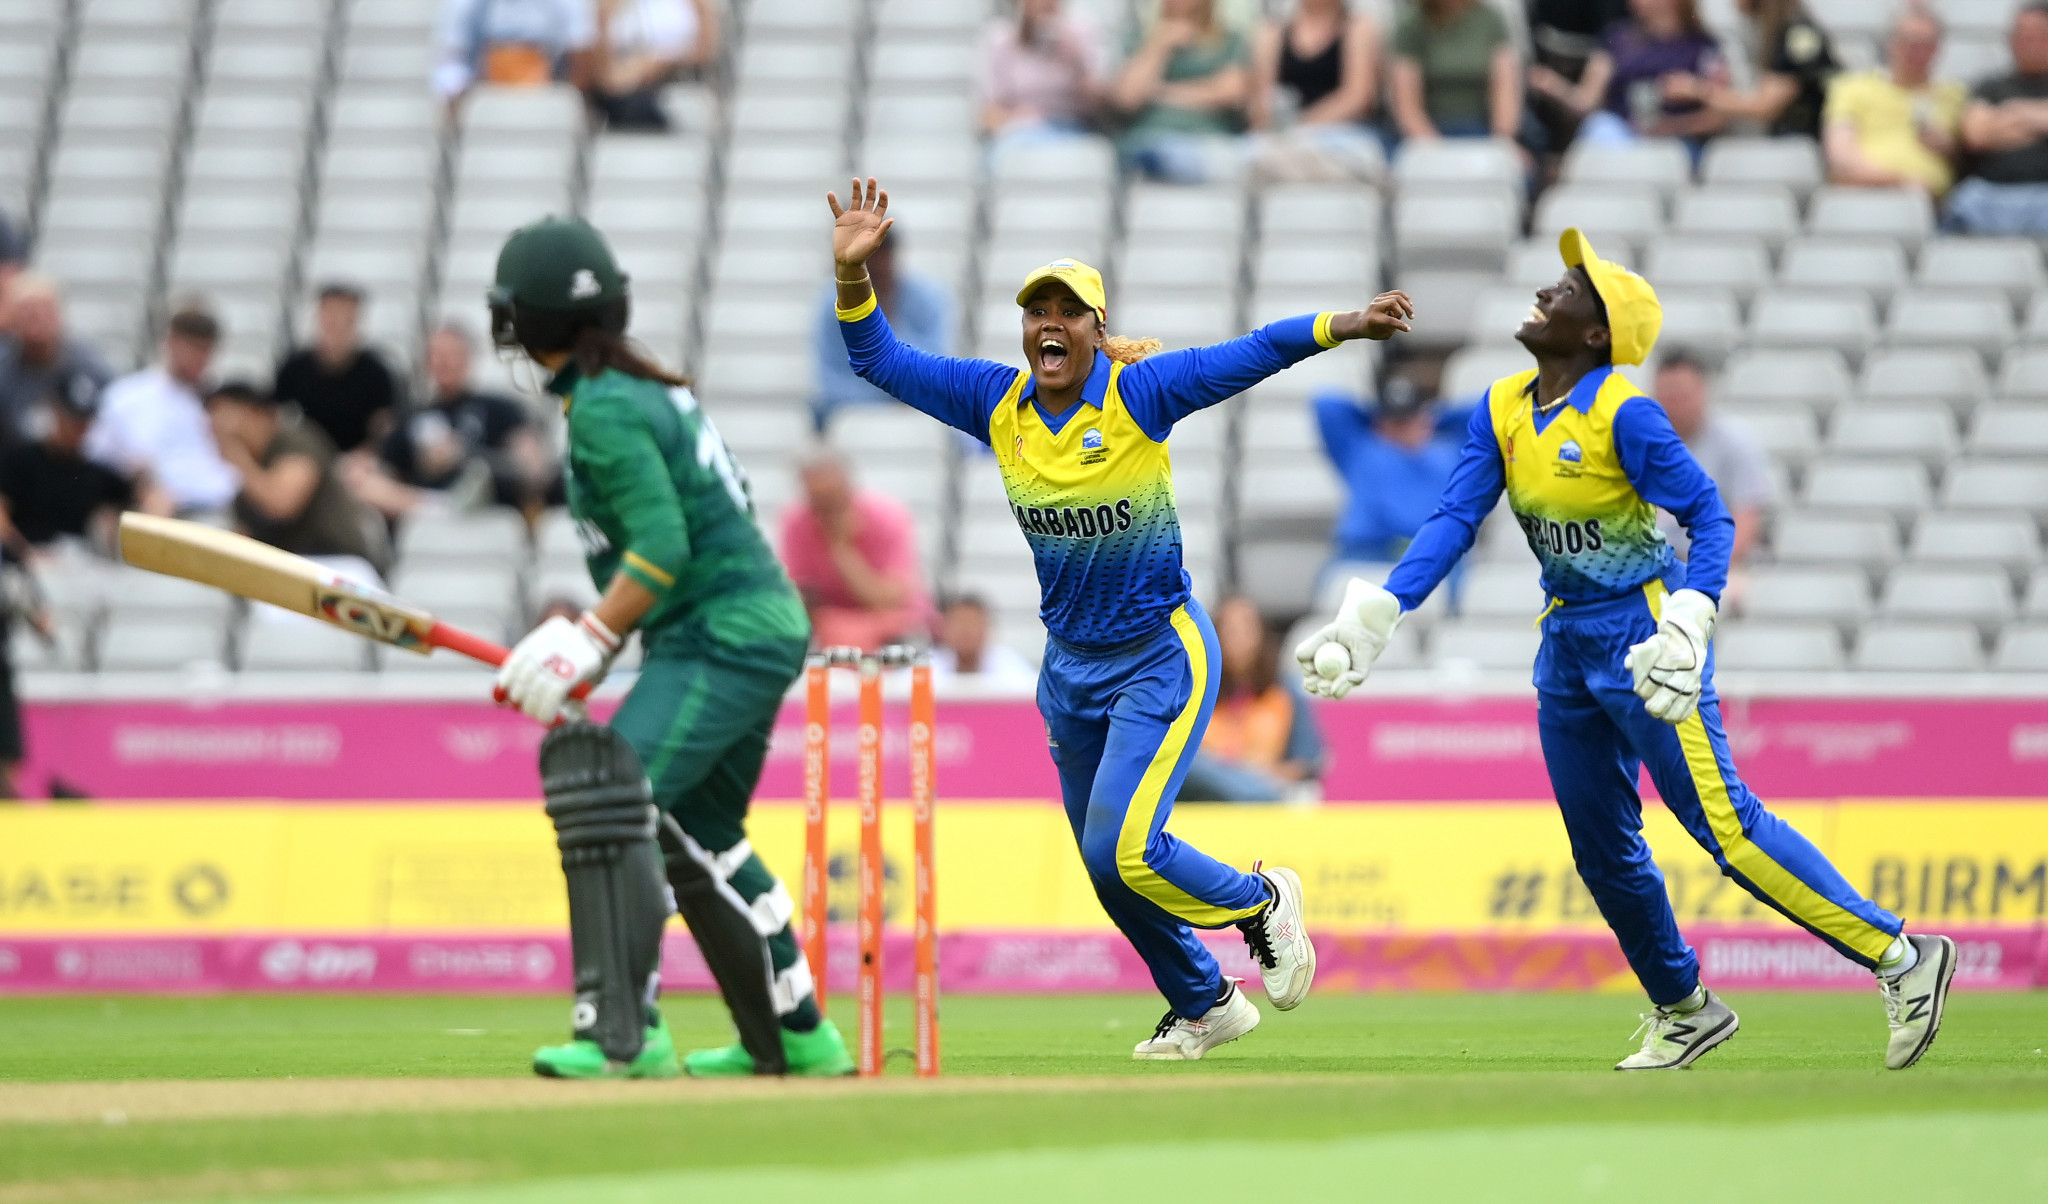 Barbados celebrated a 15-run win over Pakistan in their first match at the Commonwealth Games ©Getty Images